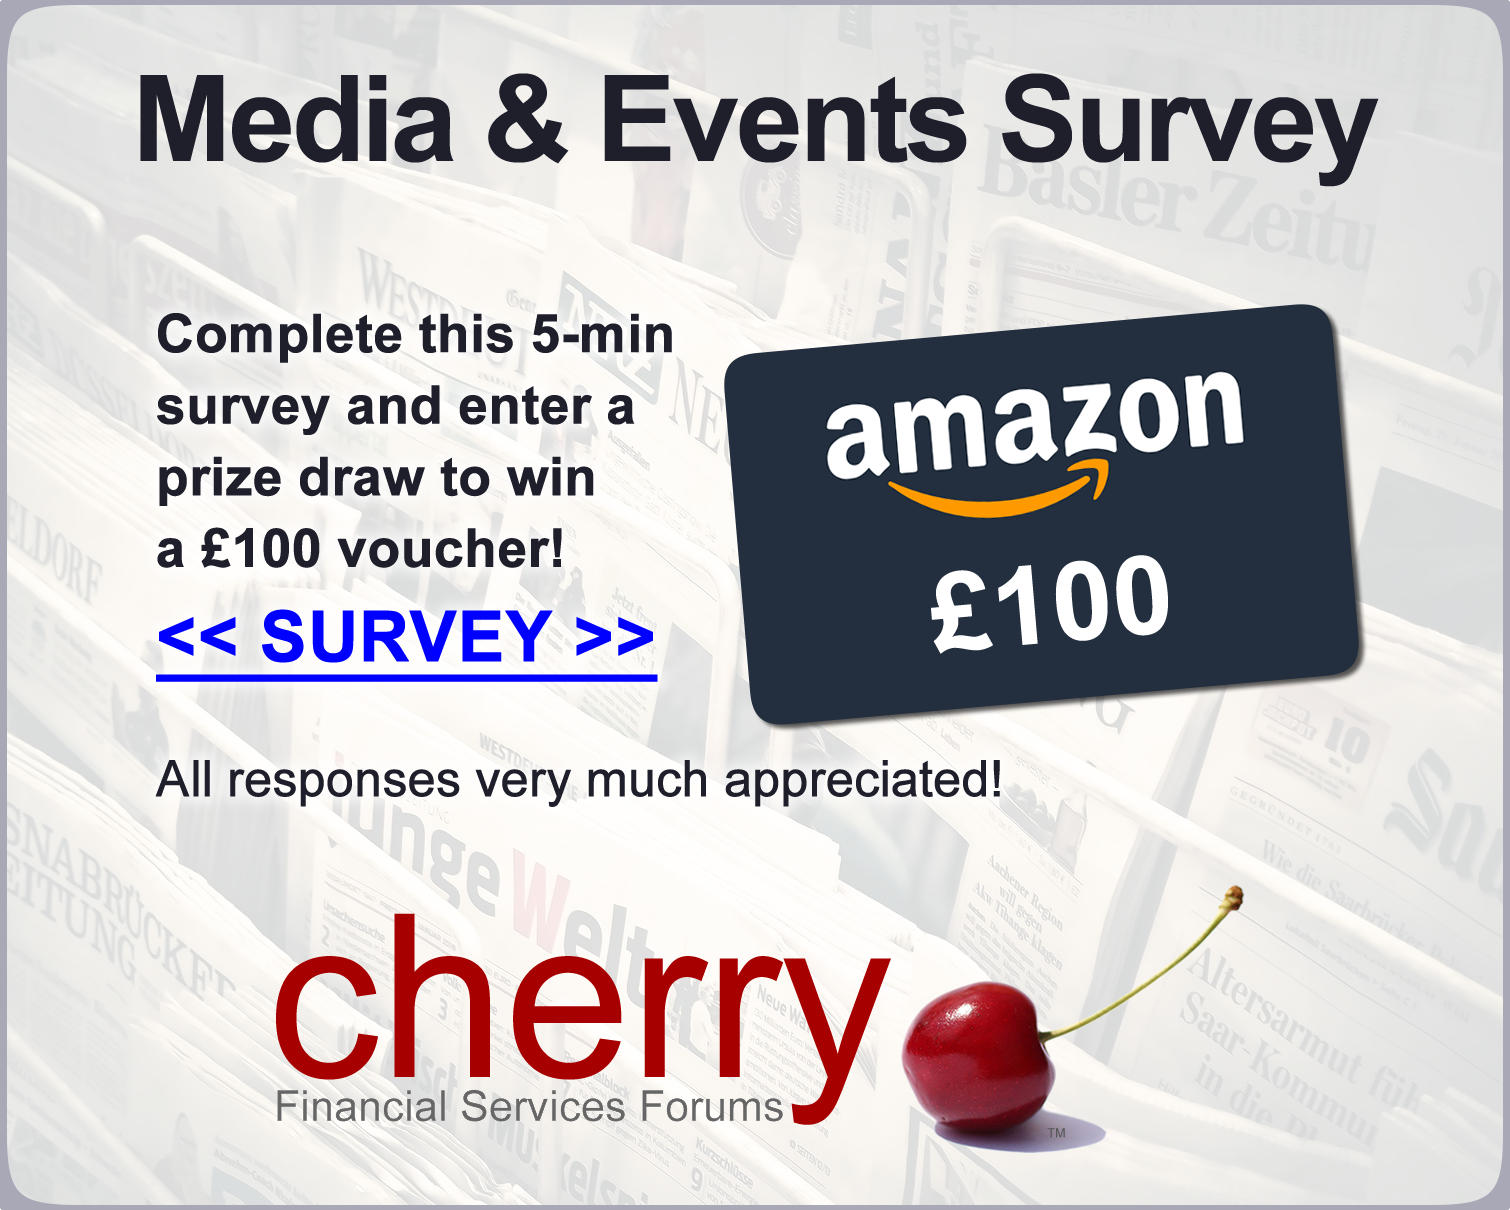 Click to complete the survey